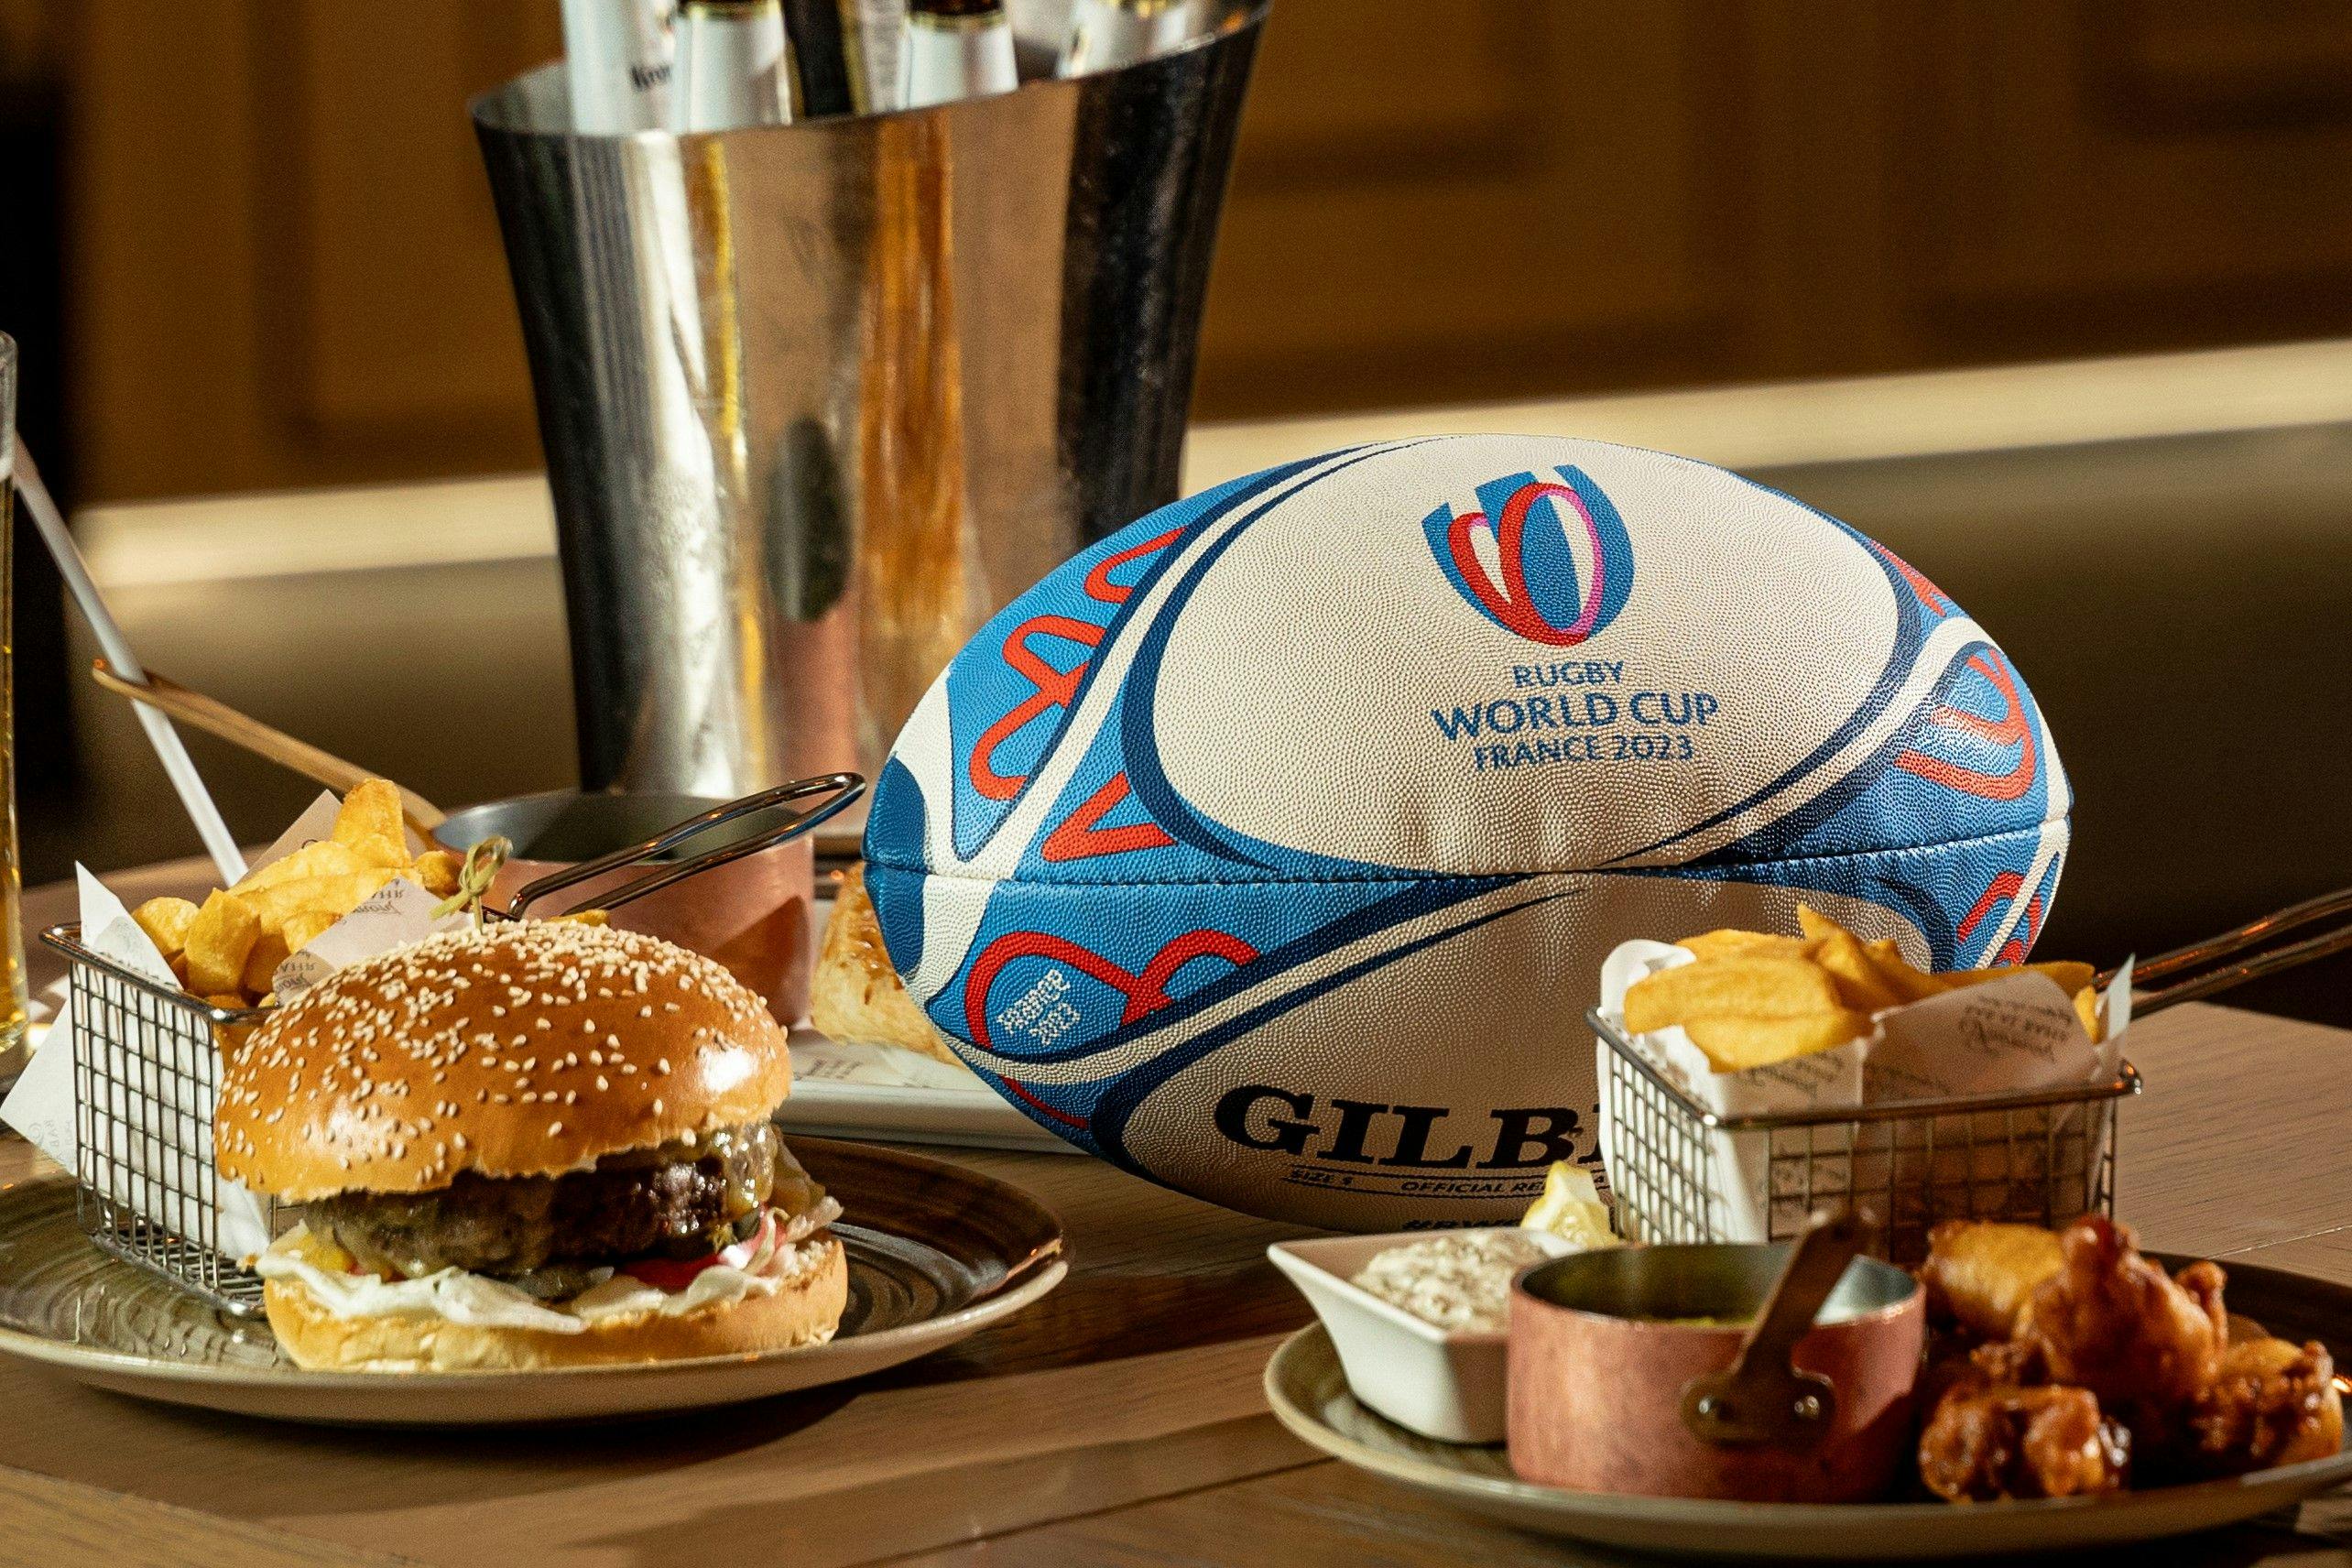 WHERE TO WATCH THE RUGBY WORLD CUP IN ABU DHABI